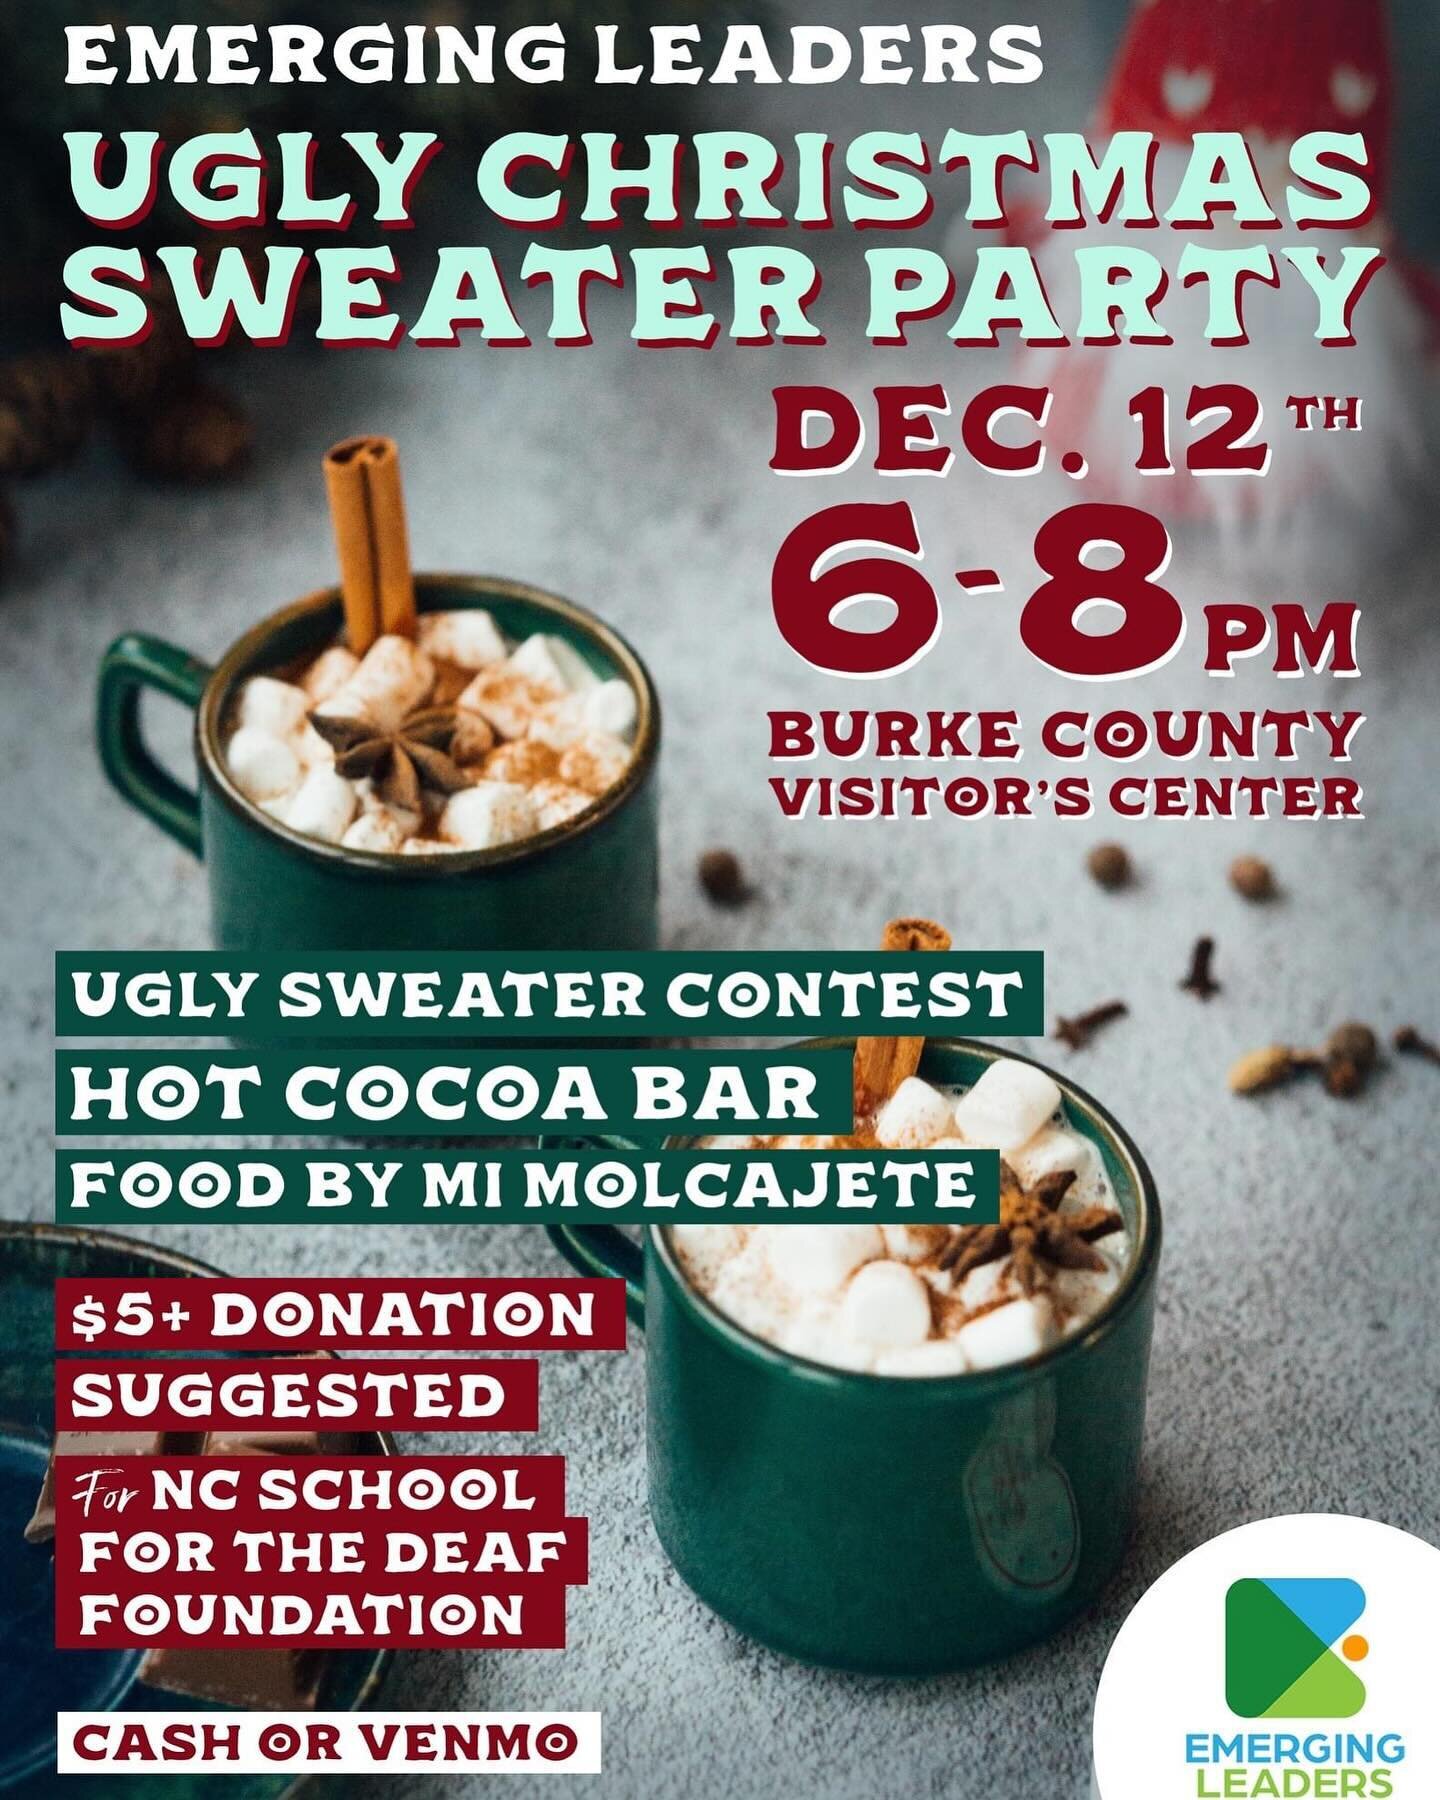 🎄🪩 Join us for our Emerging Leaders Ugly Christmas Sweater Party at the new @discoverburkecounty office in @downtown_motown (140 N Sterling St) on Tuesday, December 12th from 6-8 pm!!
Wear your ugliest Christmas sweater for your chance to win our u